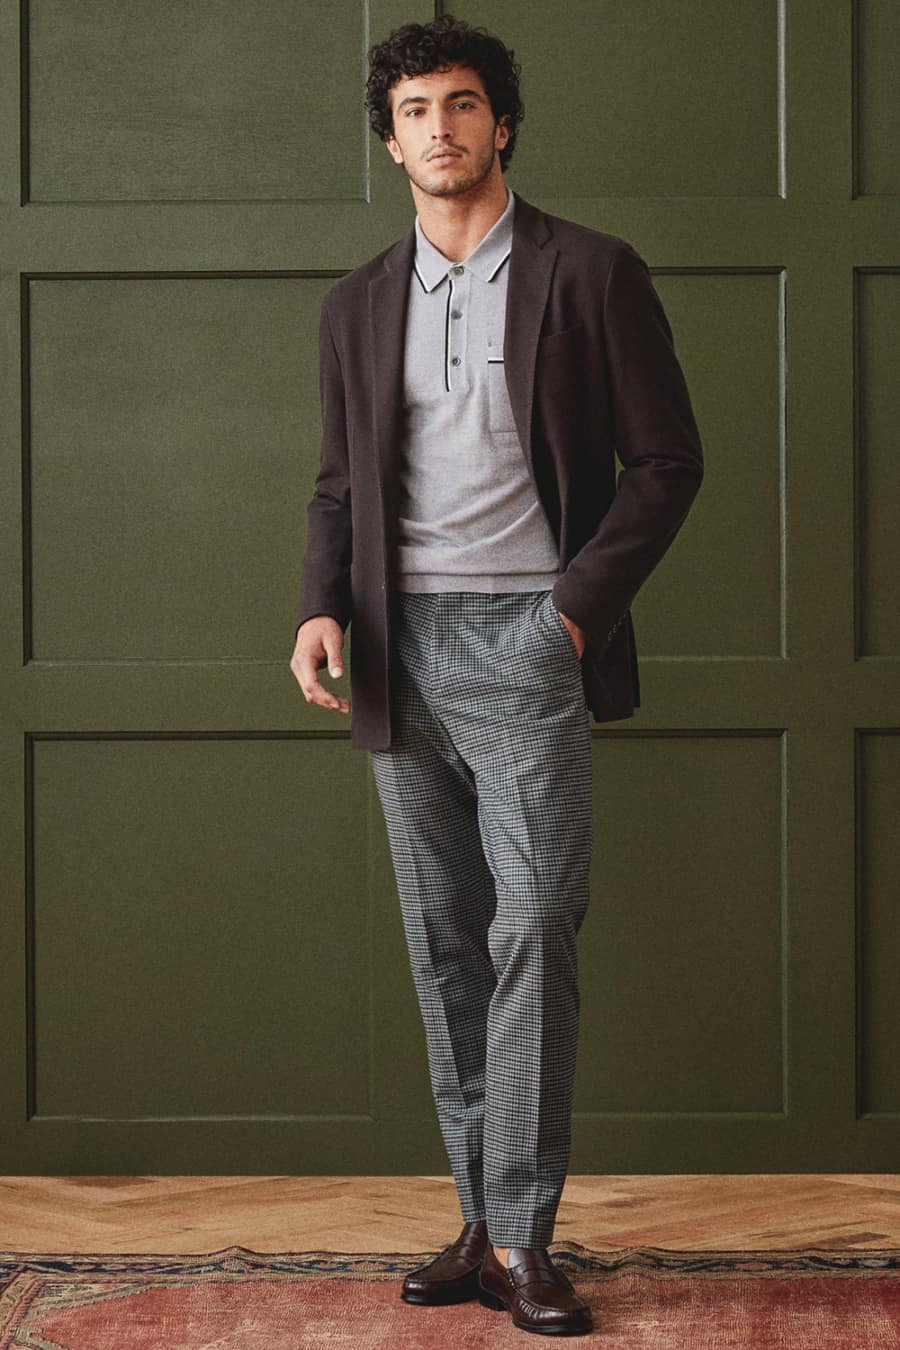 Men's wool trousers, knitted polo shirt, navy unstructured blazer and brown leather loafers outfit